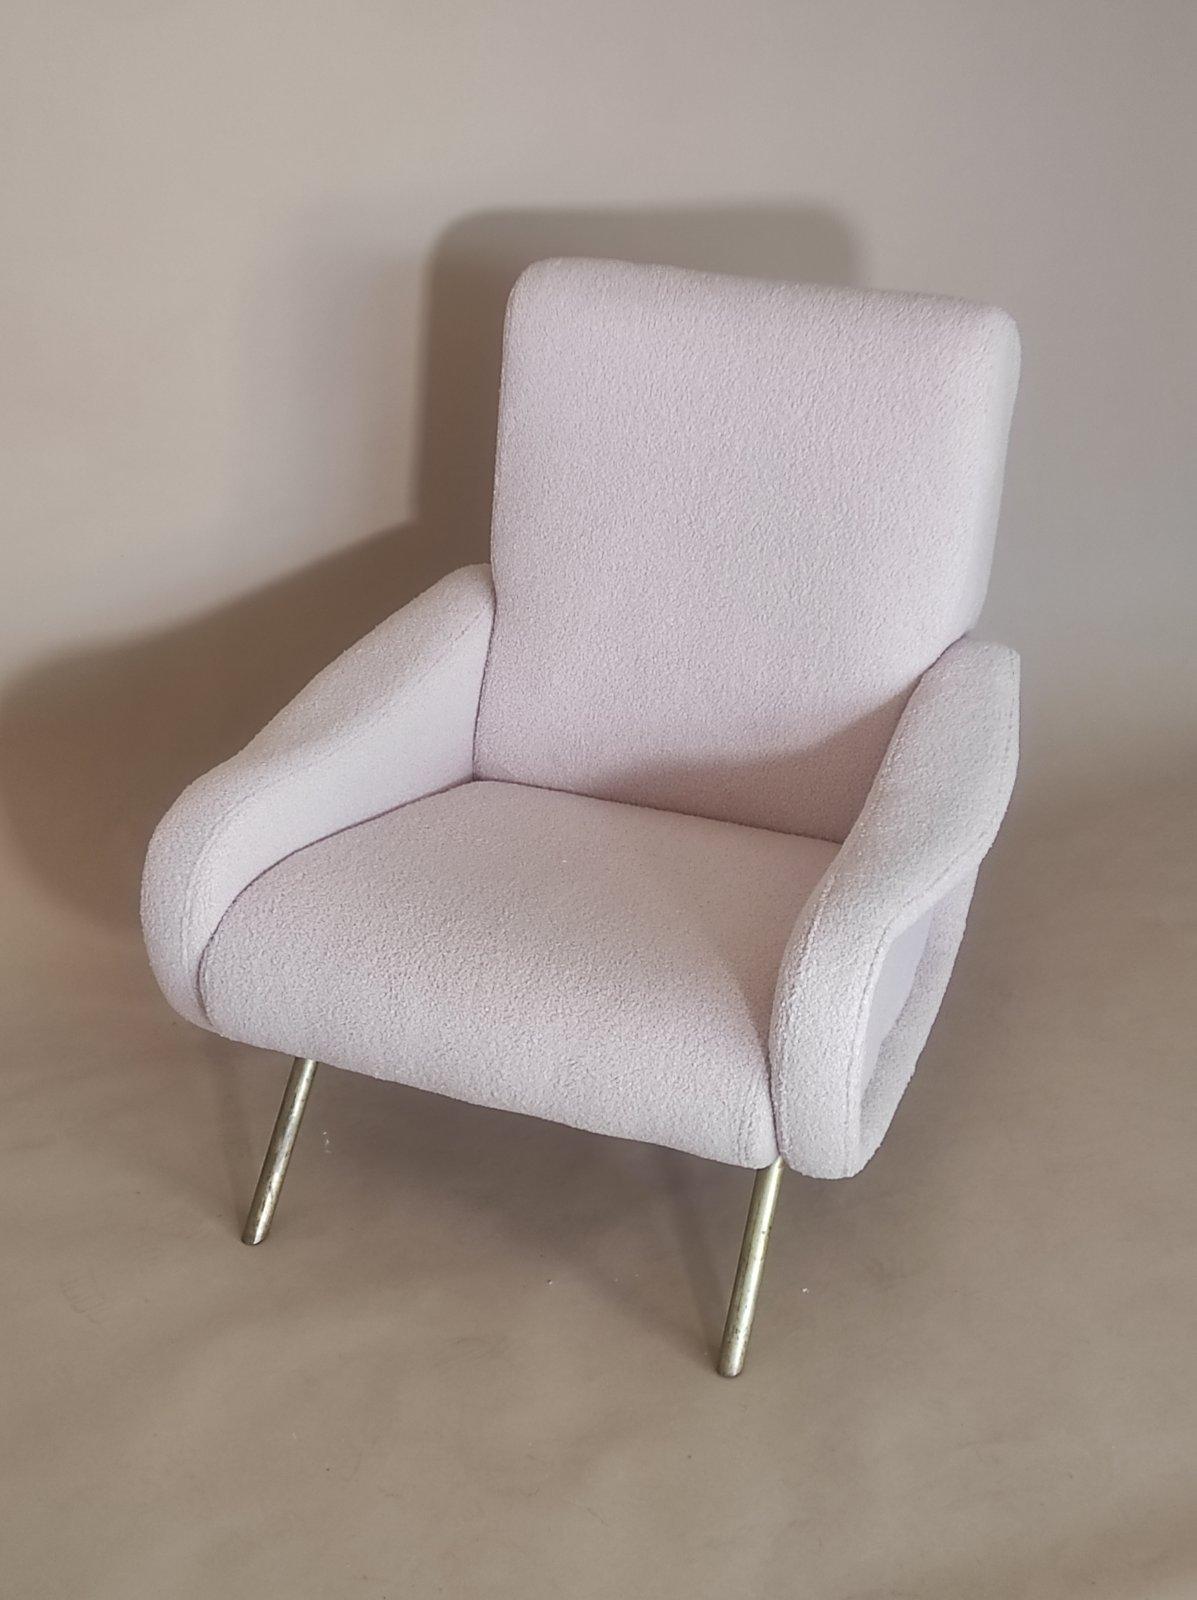 Mid-20th Century Marco Zanuso Lady Chair 1950s For Sale